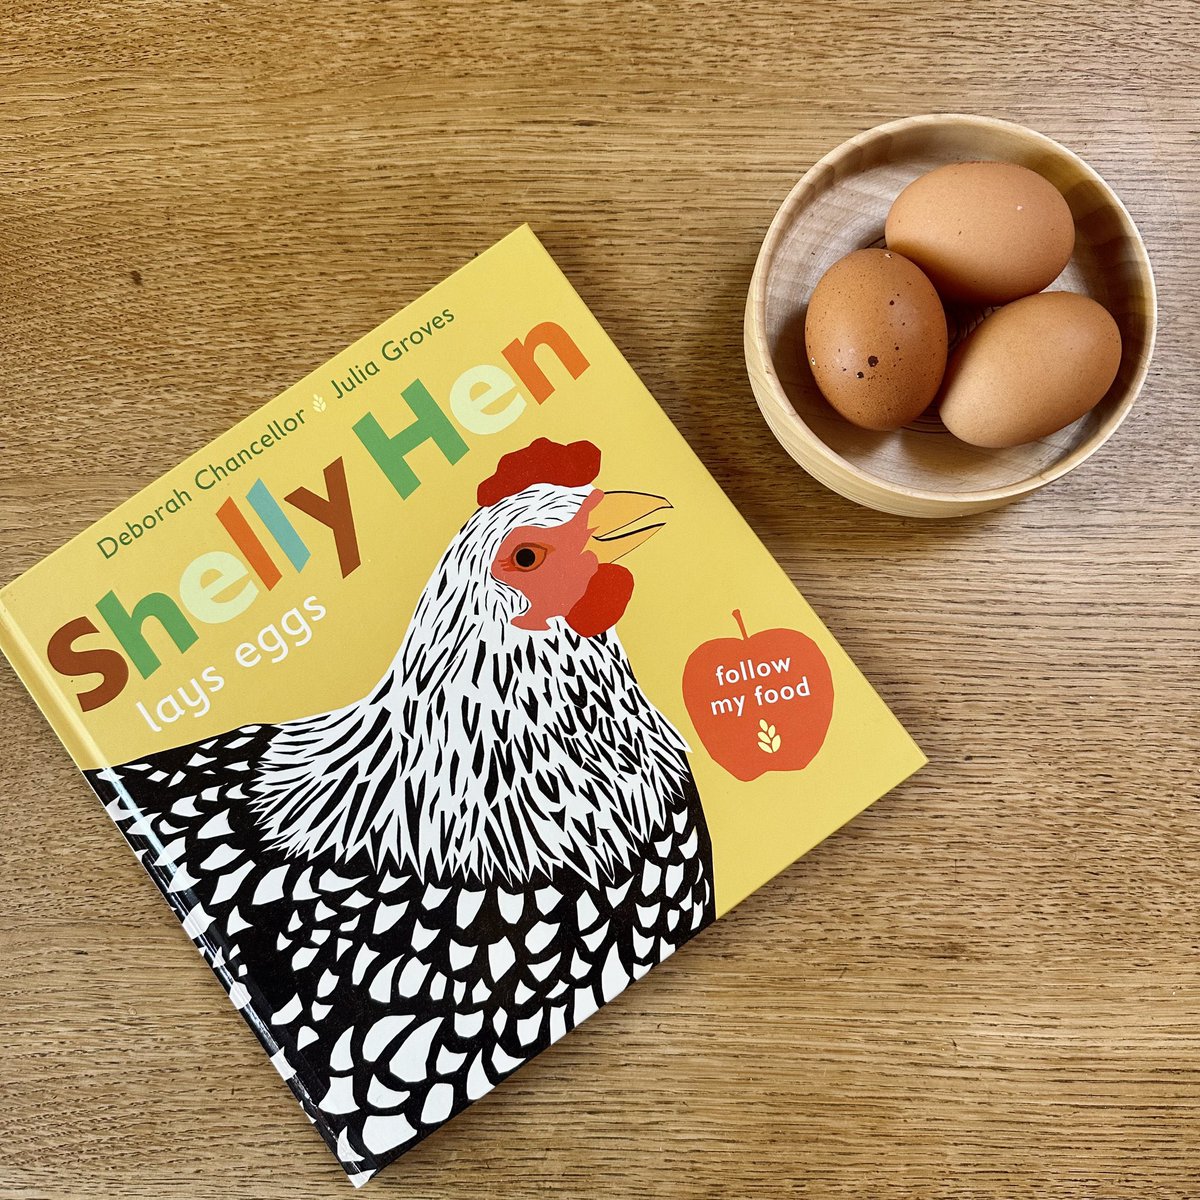 Did you know, Shelly Hen lays eggs is now in paperback? 🐣 As a special #bankholiday treat, we're giving away a copy! To be in with a chance of winning simply: 🐔 Like this post 🐔 Share this post 🐔 Follow us! Closes Midday 29/08. UK only. #competition #edutwitter #kidsbooks